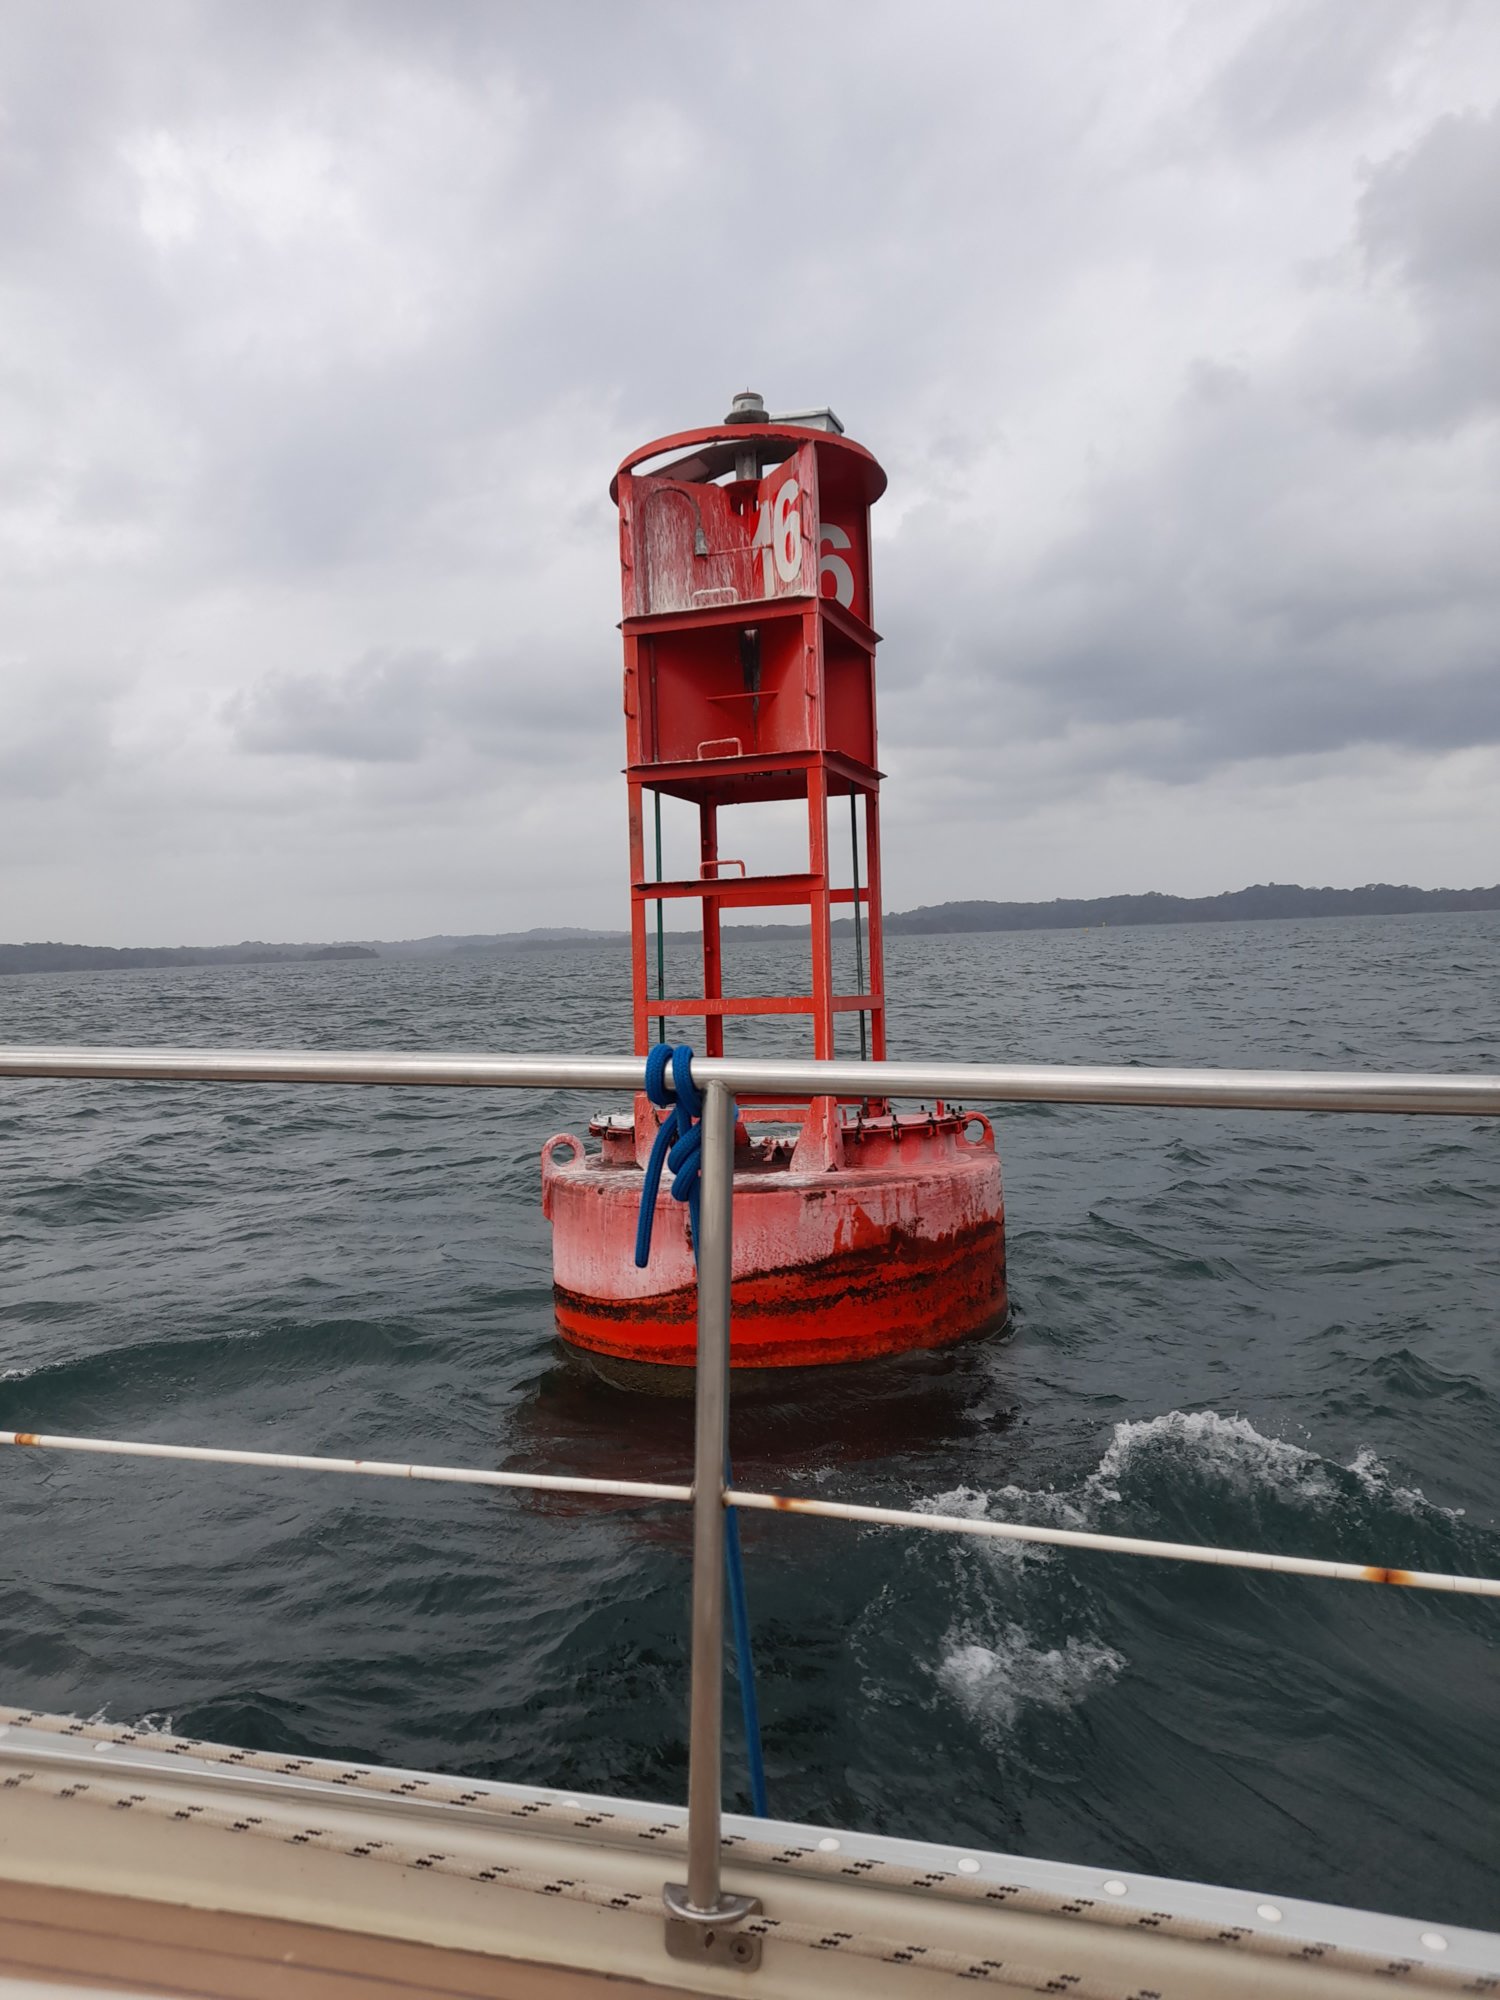 The Panama canal images/2023/can/buoy.jpg